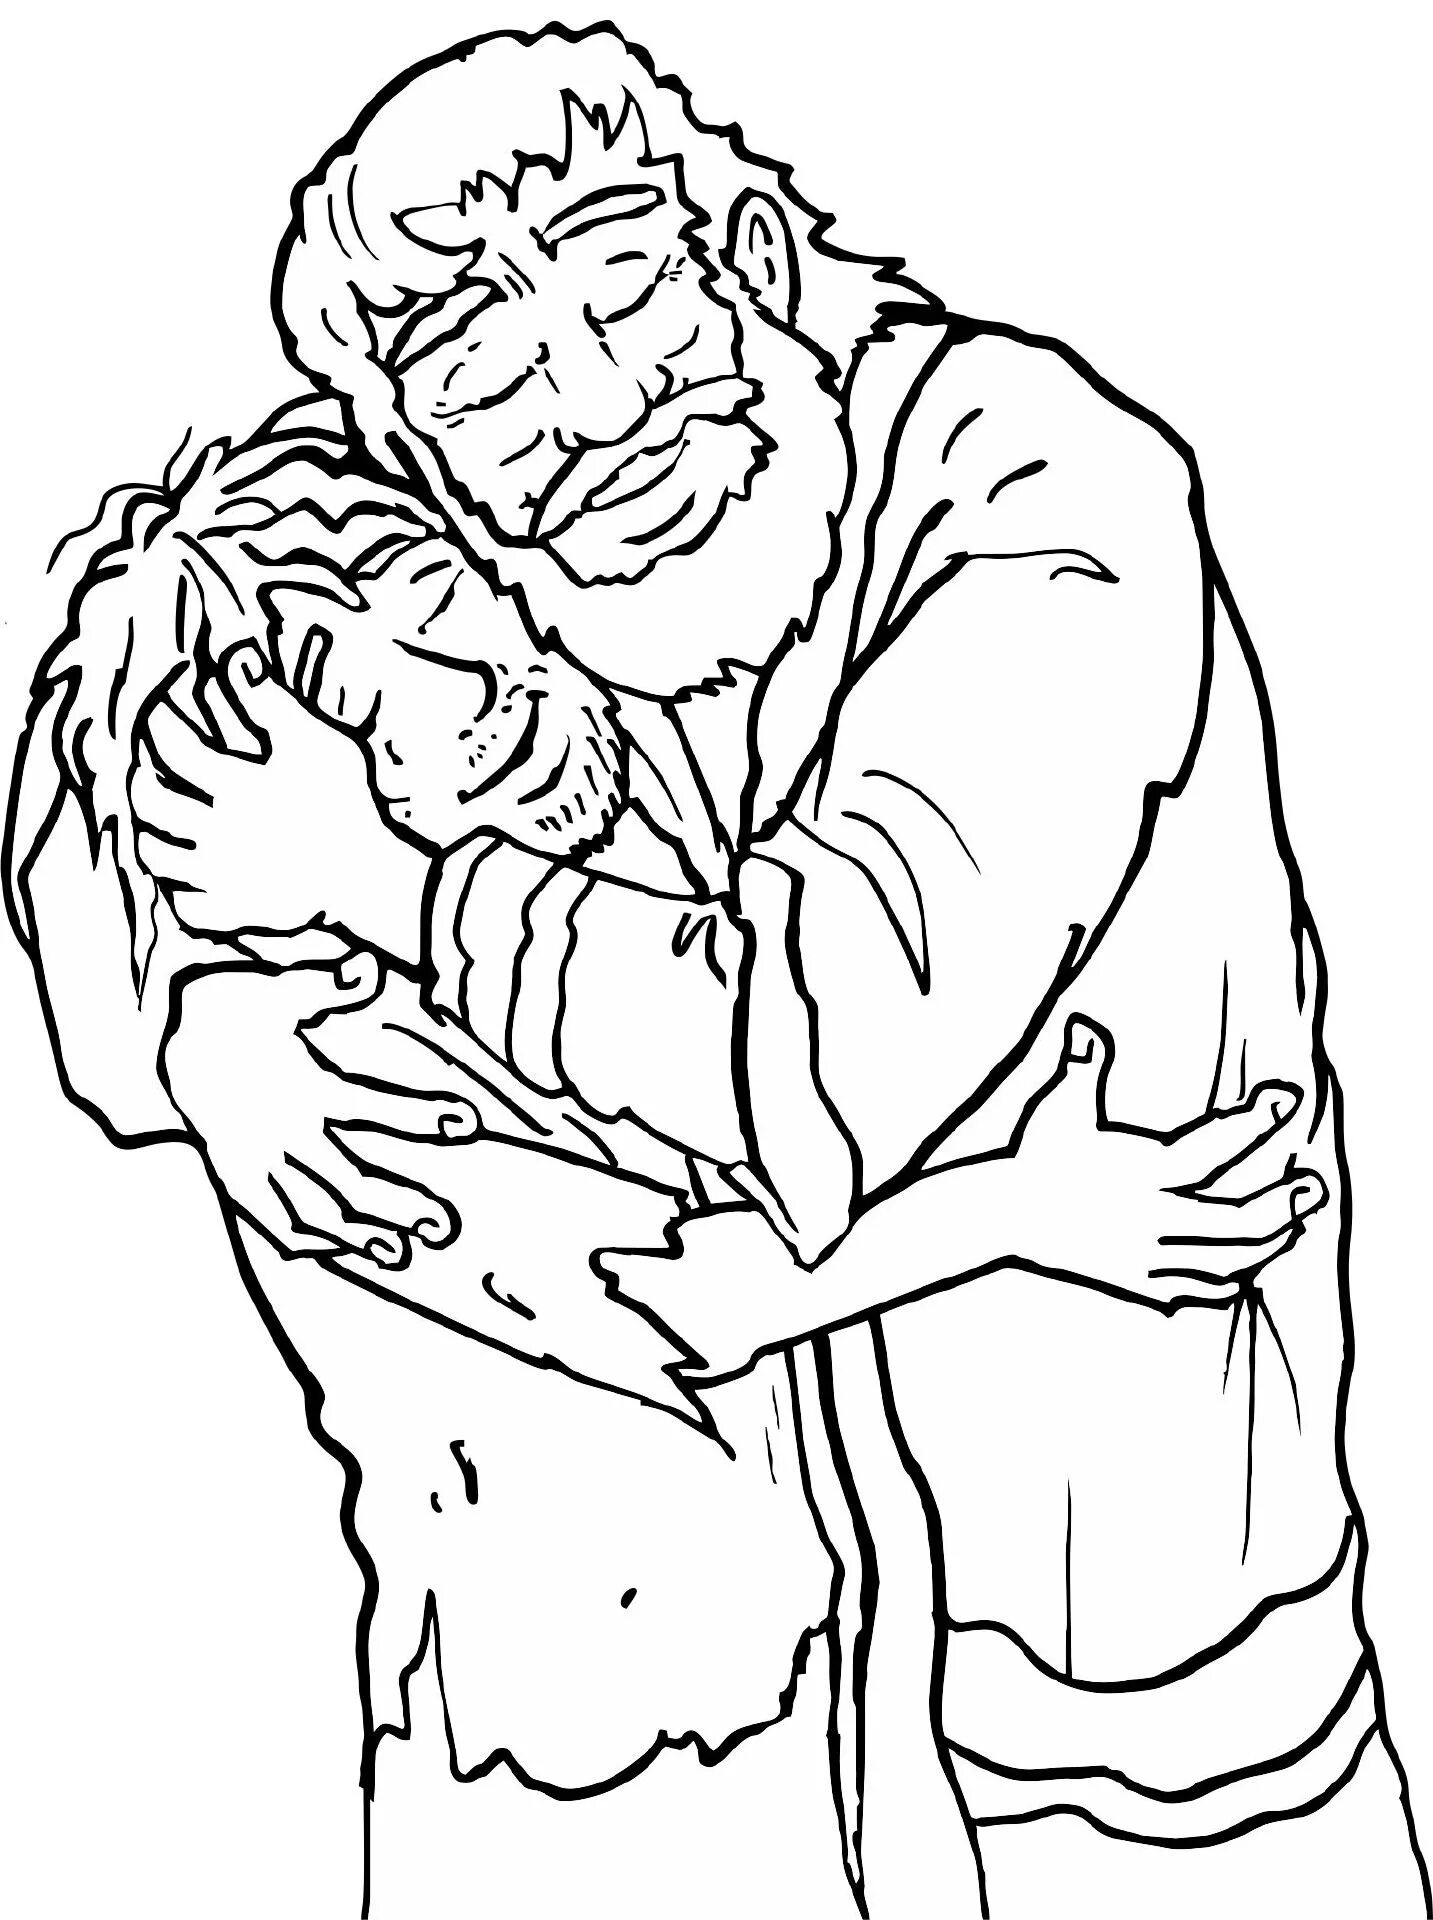 Coloring page of the week of the dazzling prodigal son